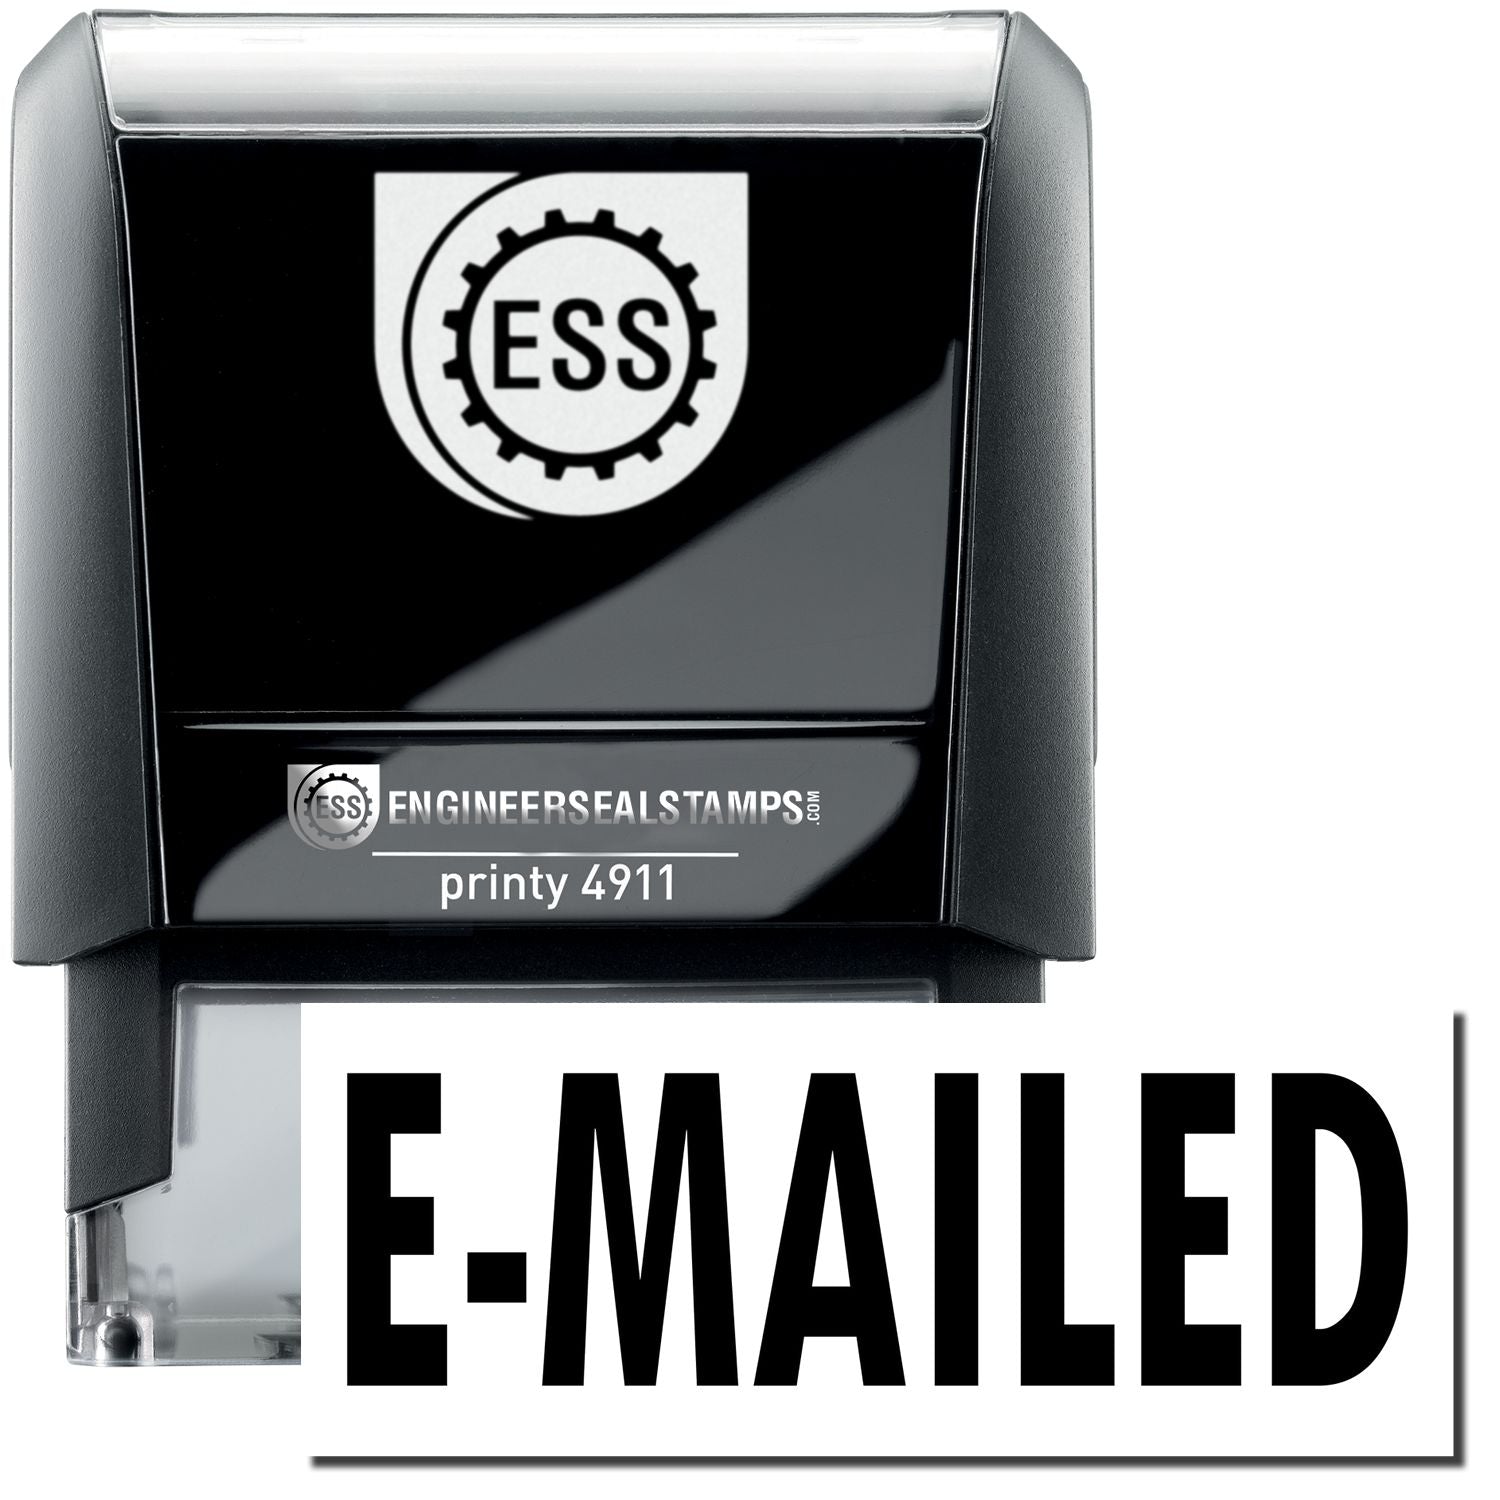 A self-inking stamp with a stamped image showing how the text "E-MAILED" is displayed after stamping.